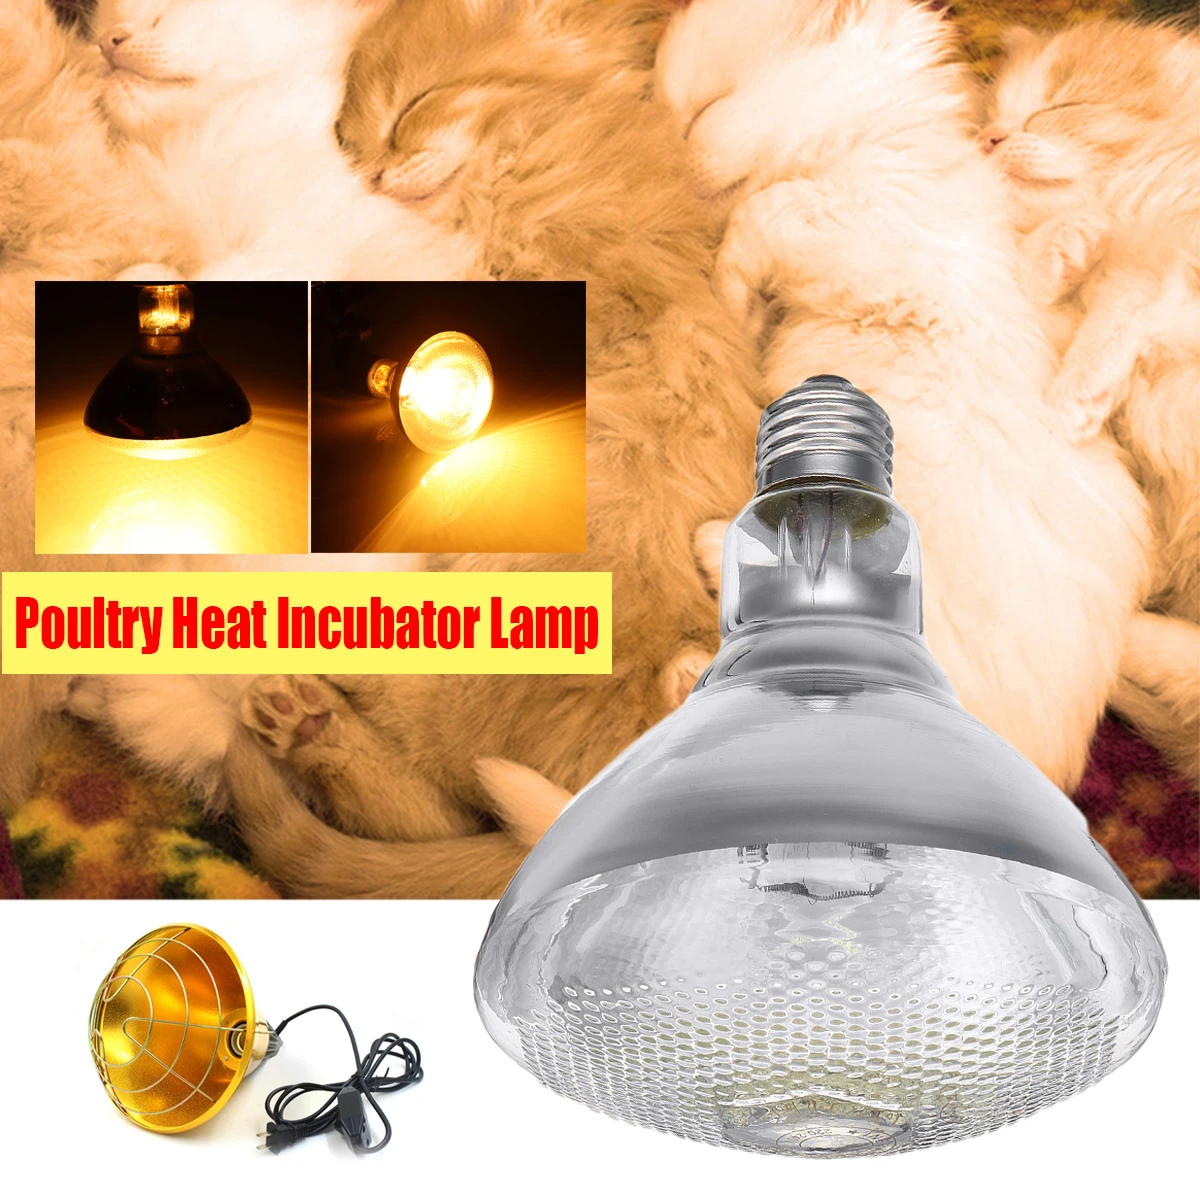 

250W Poultry adjustable Switch Heat Incubator Lamp & Hen Pet Infrared Bulb Light Rearing for chick Livestock Piggy Duckling Warm